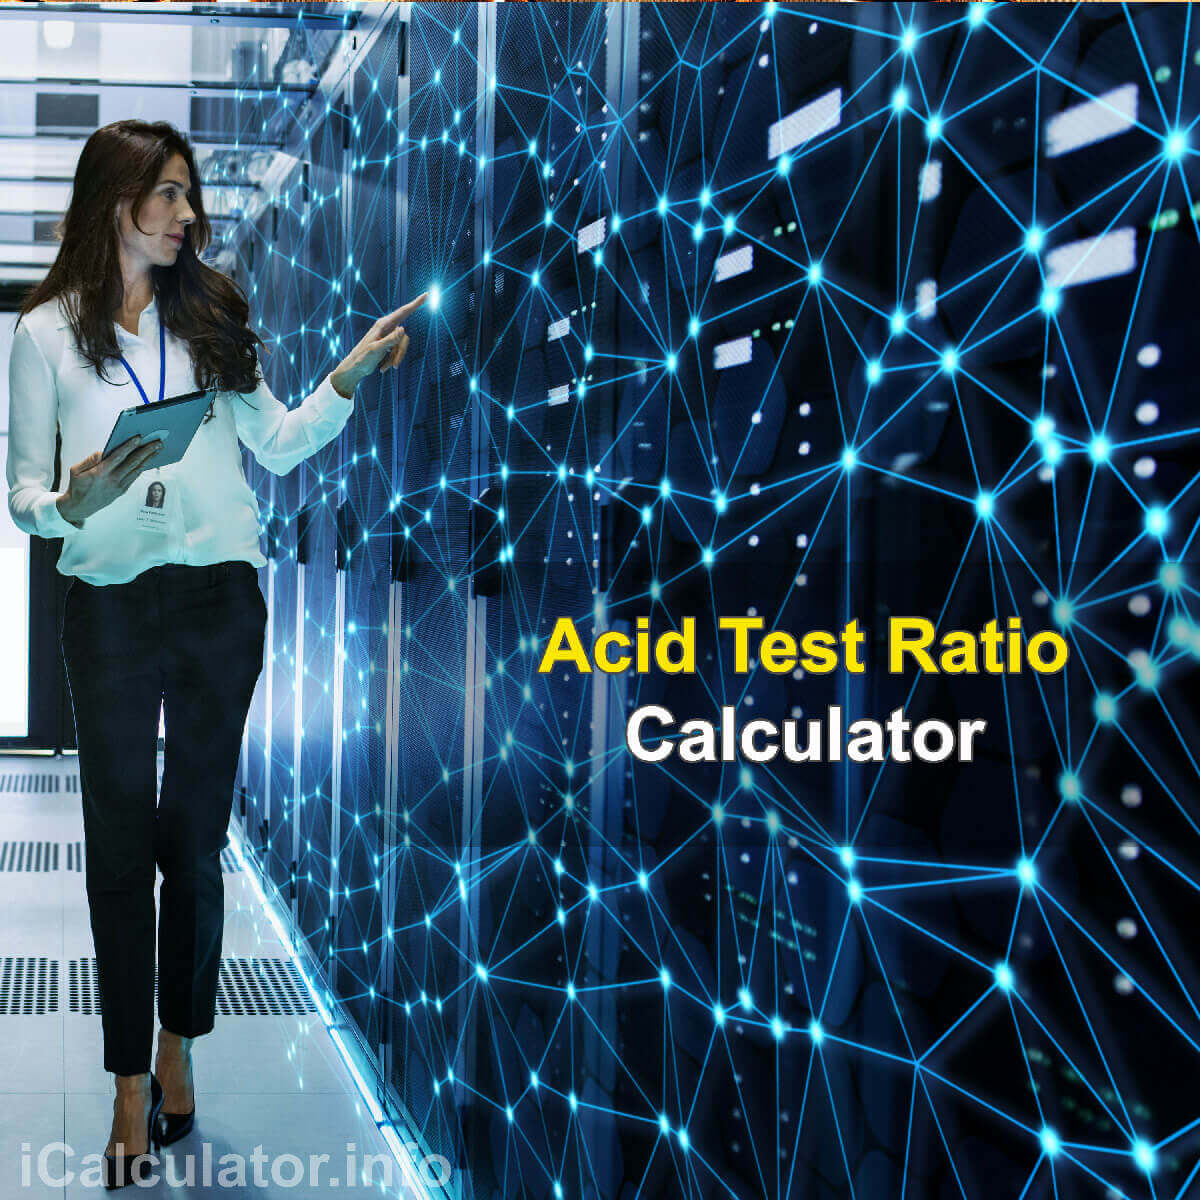 Acid Test Ratio Calculator. This image provides details of how to calculate the Acid Test Ratio using a calculator and notepad. By using the rule of Acid Test Ratio formula, the Acid Test Ratio Calculator provides a true calculation of how viable a company is for investment and financial stability based on cash flows.